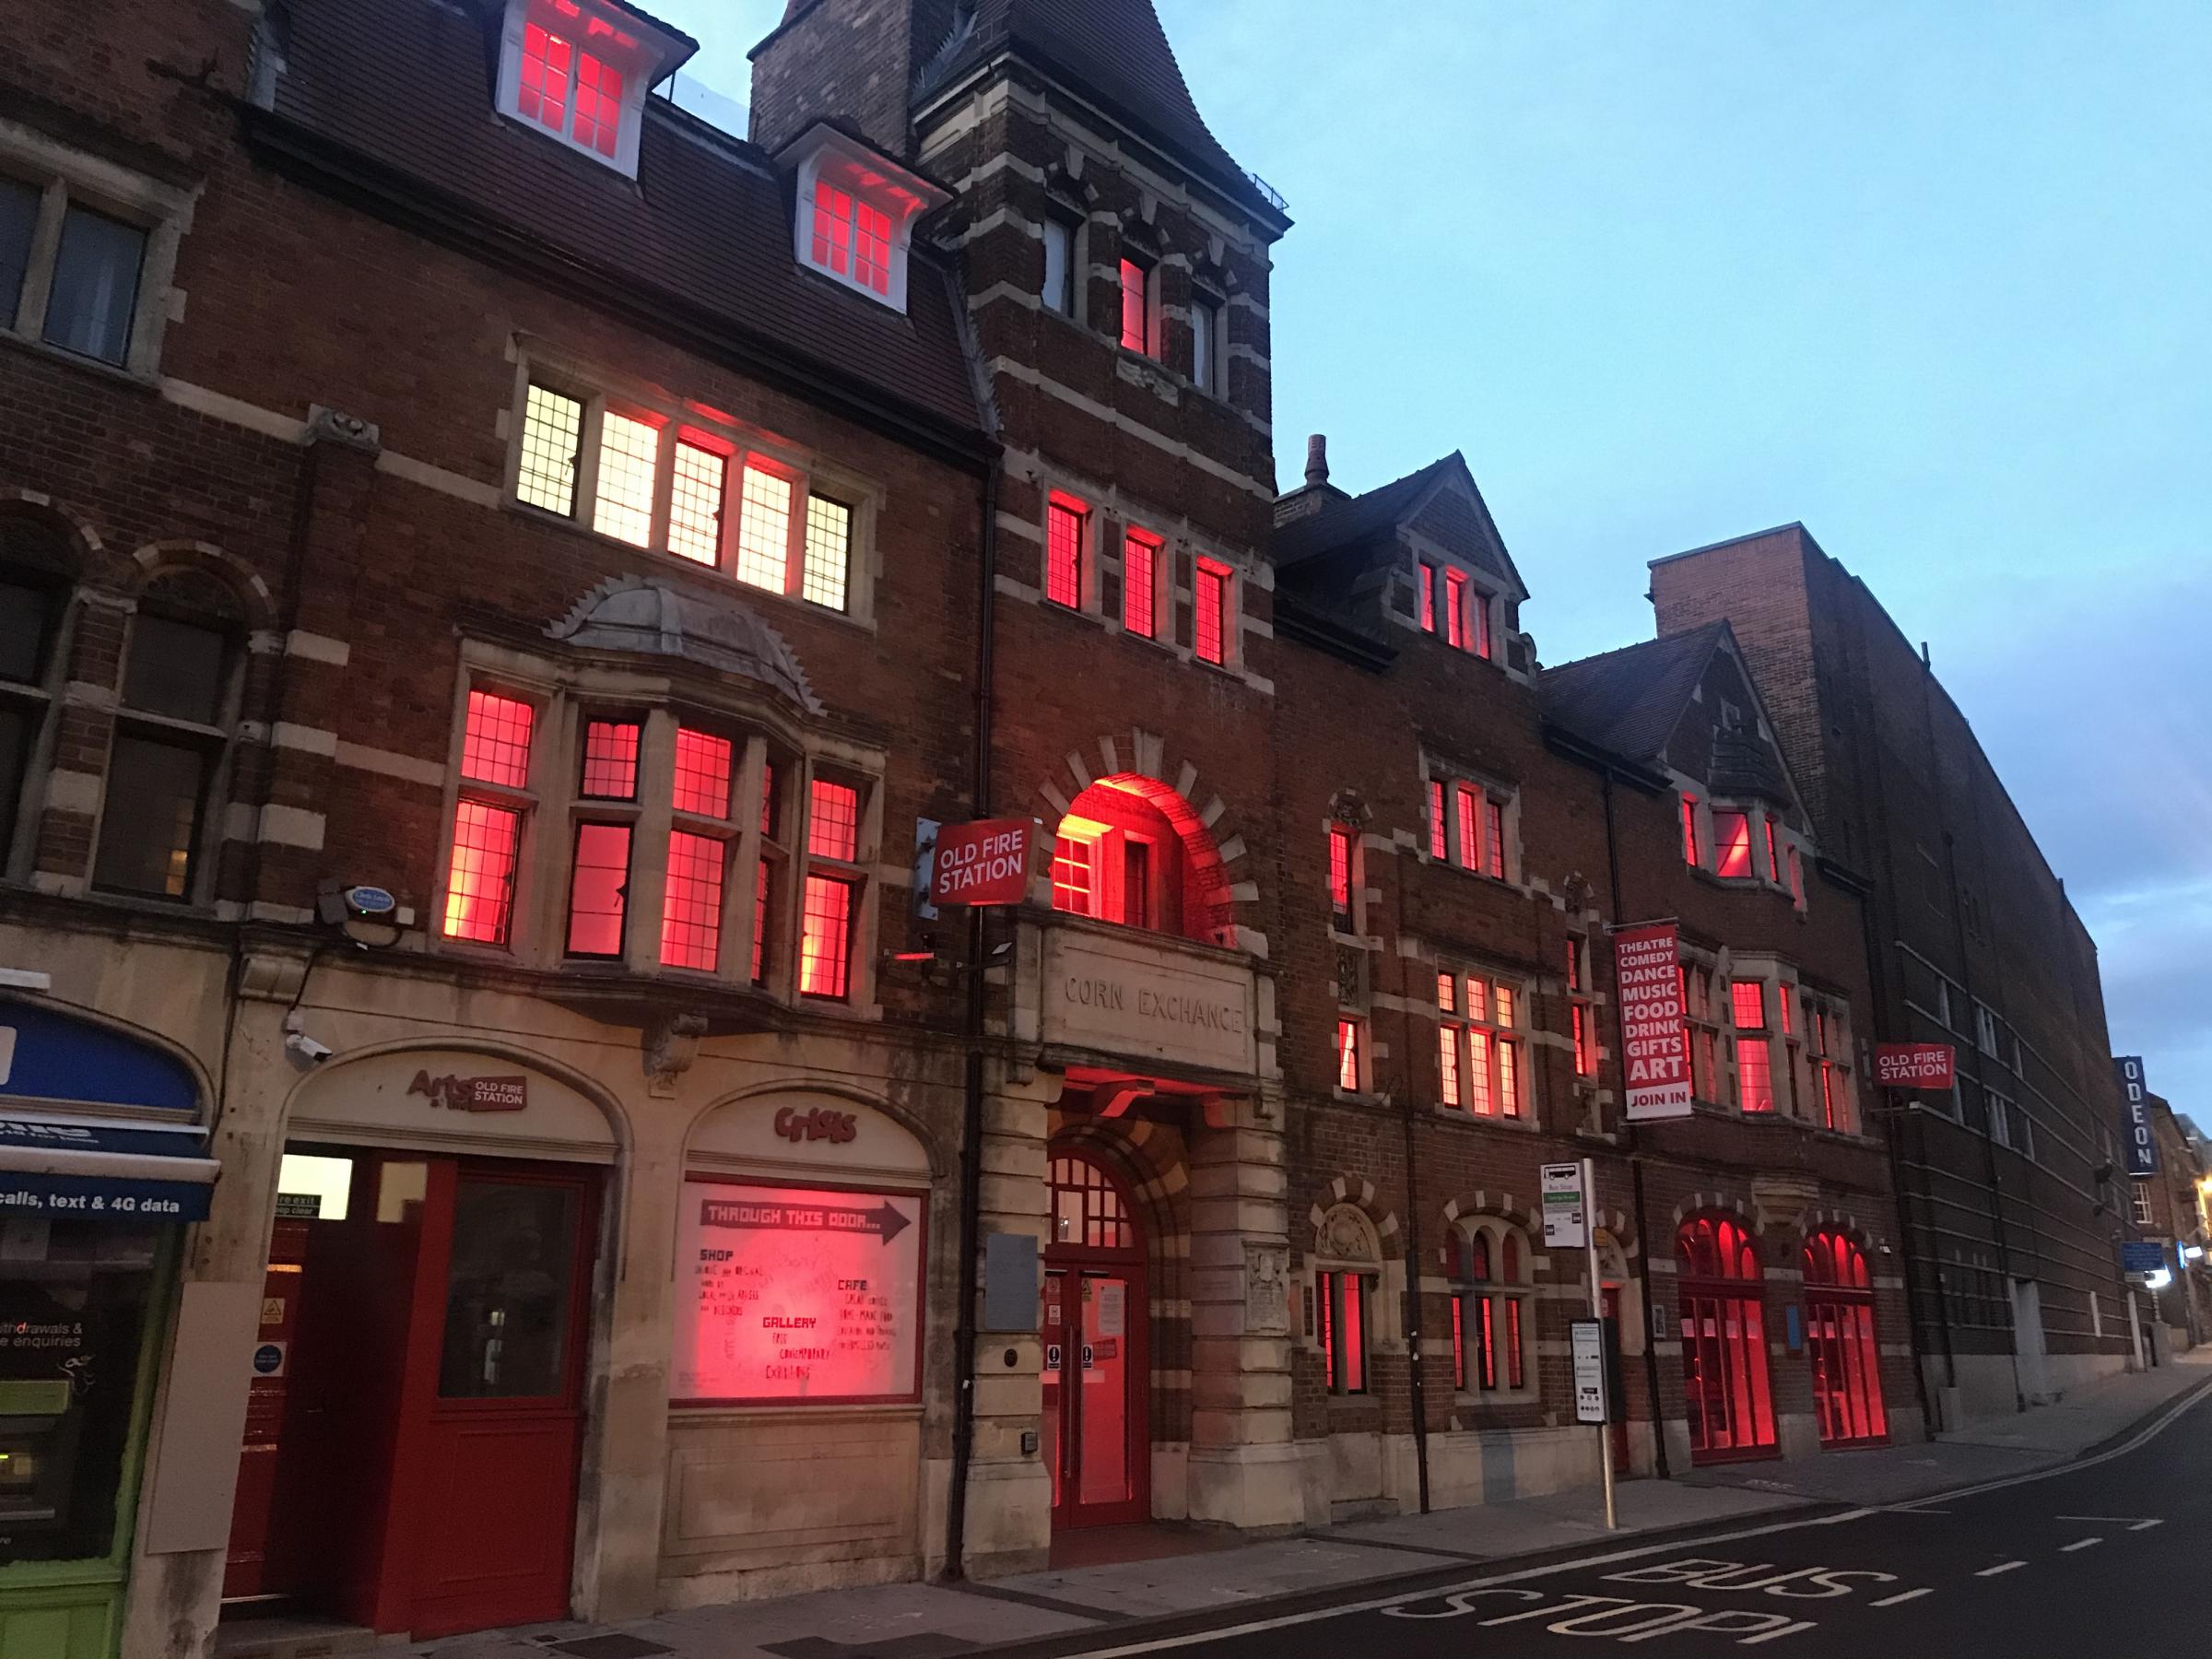 Oxfordshire theatres, such as the Old Fire Station, lit up their buildings with red light last July to highlight the financial emergency in the sector. Many will do the same tonight